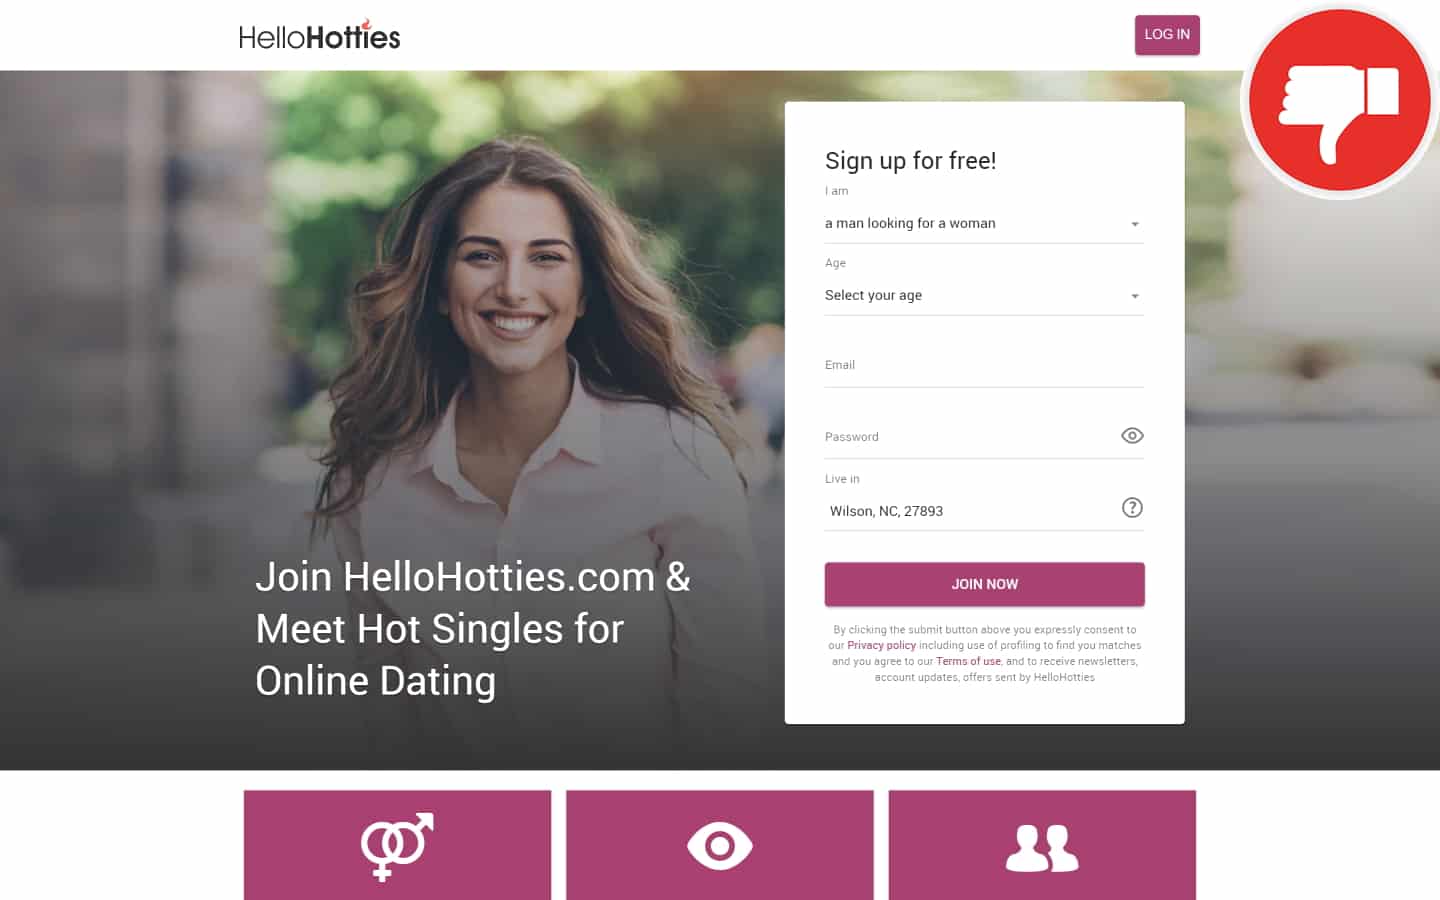 Review HelloHotties.com scam experience